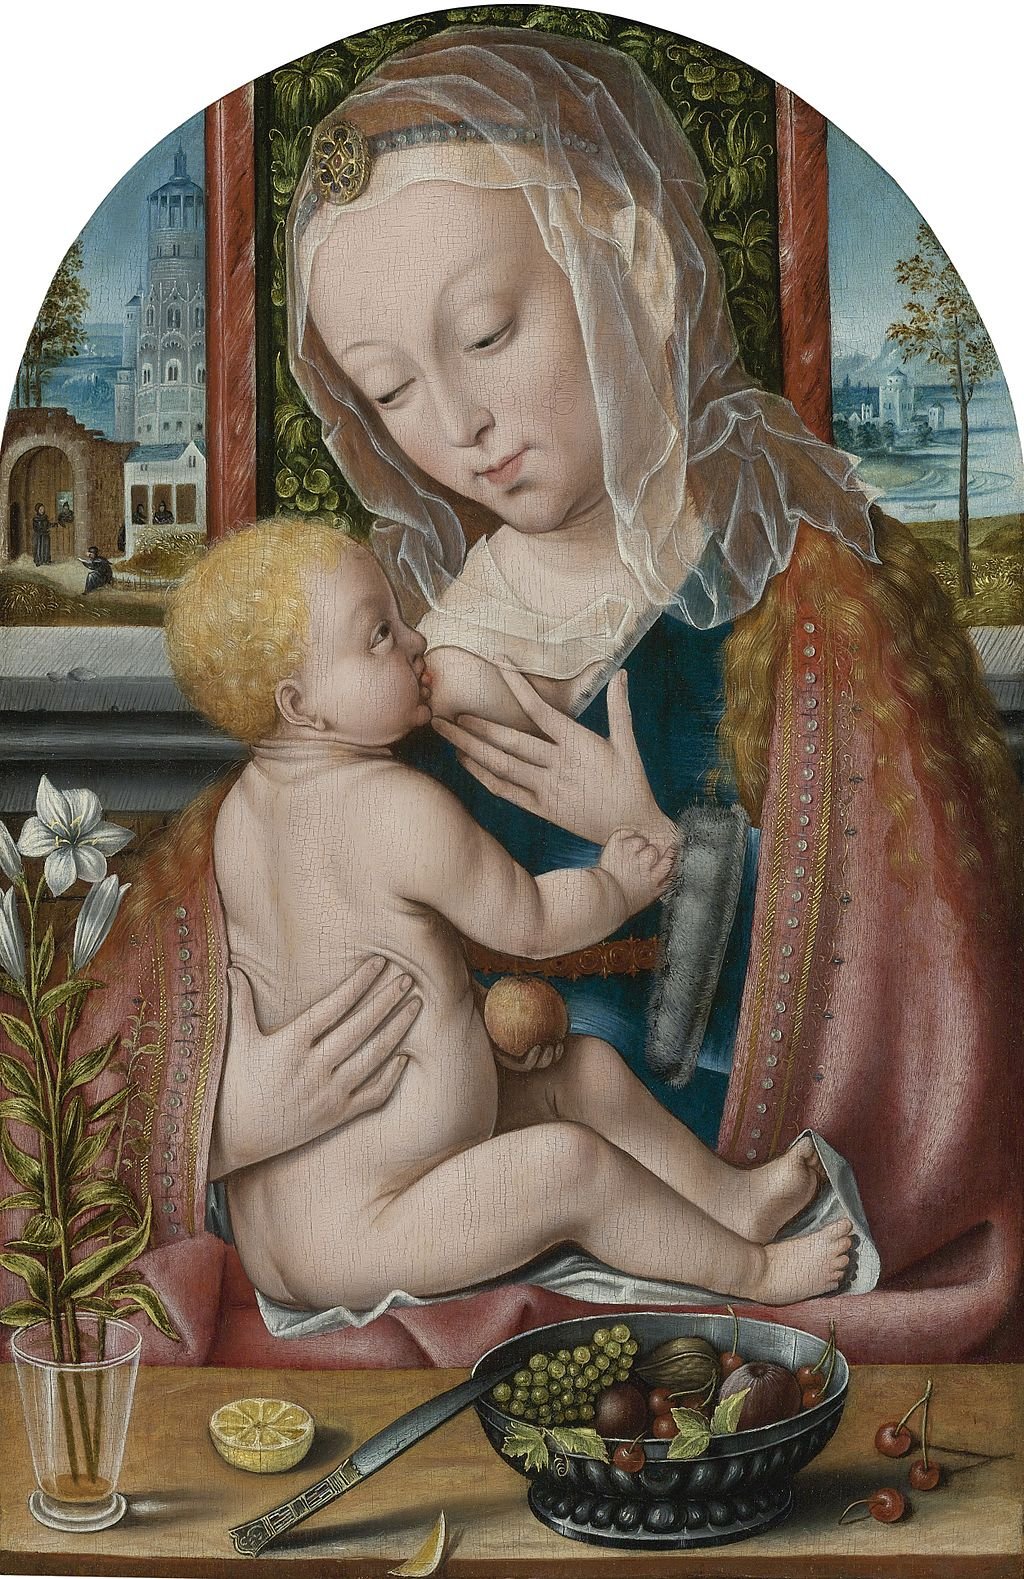 story of the virgin mary midwives Sex Images Hq